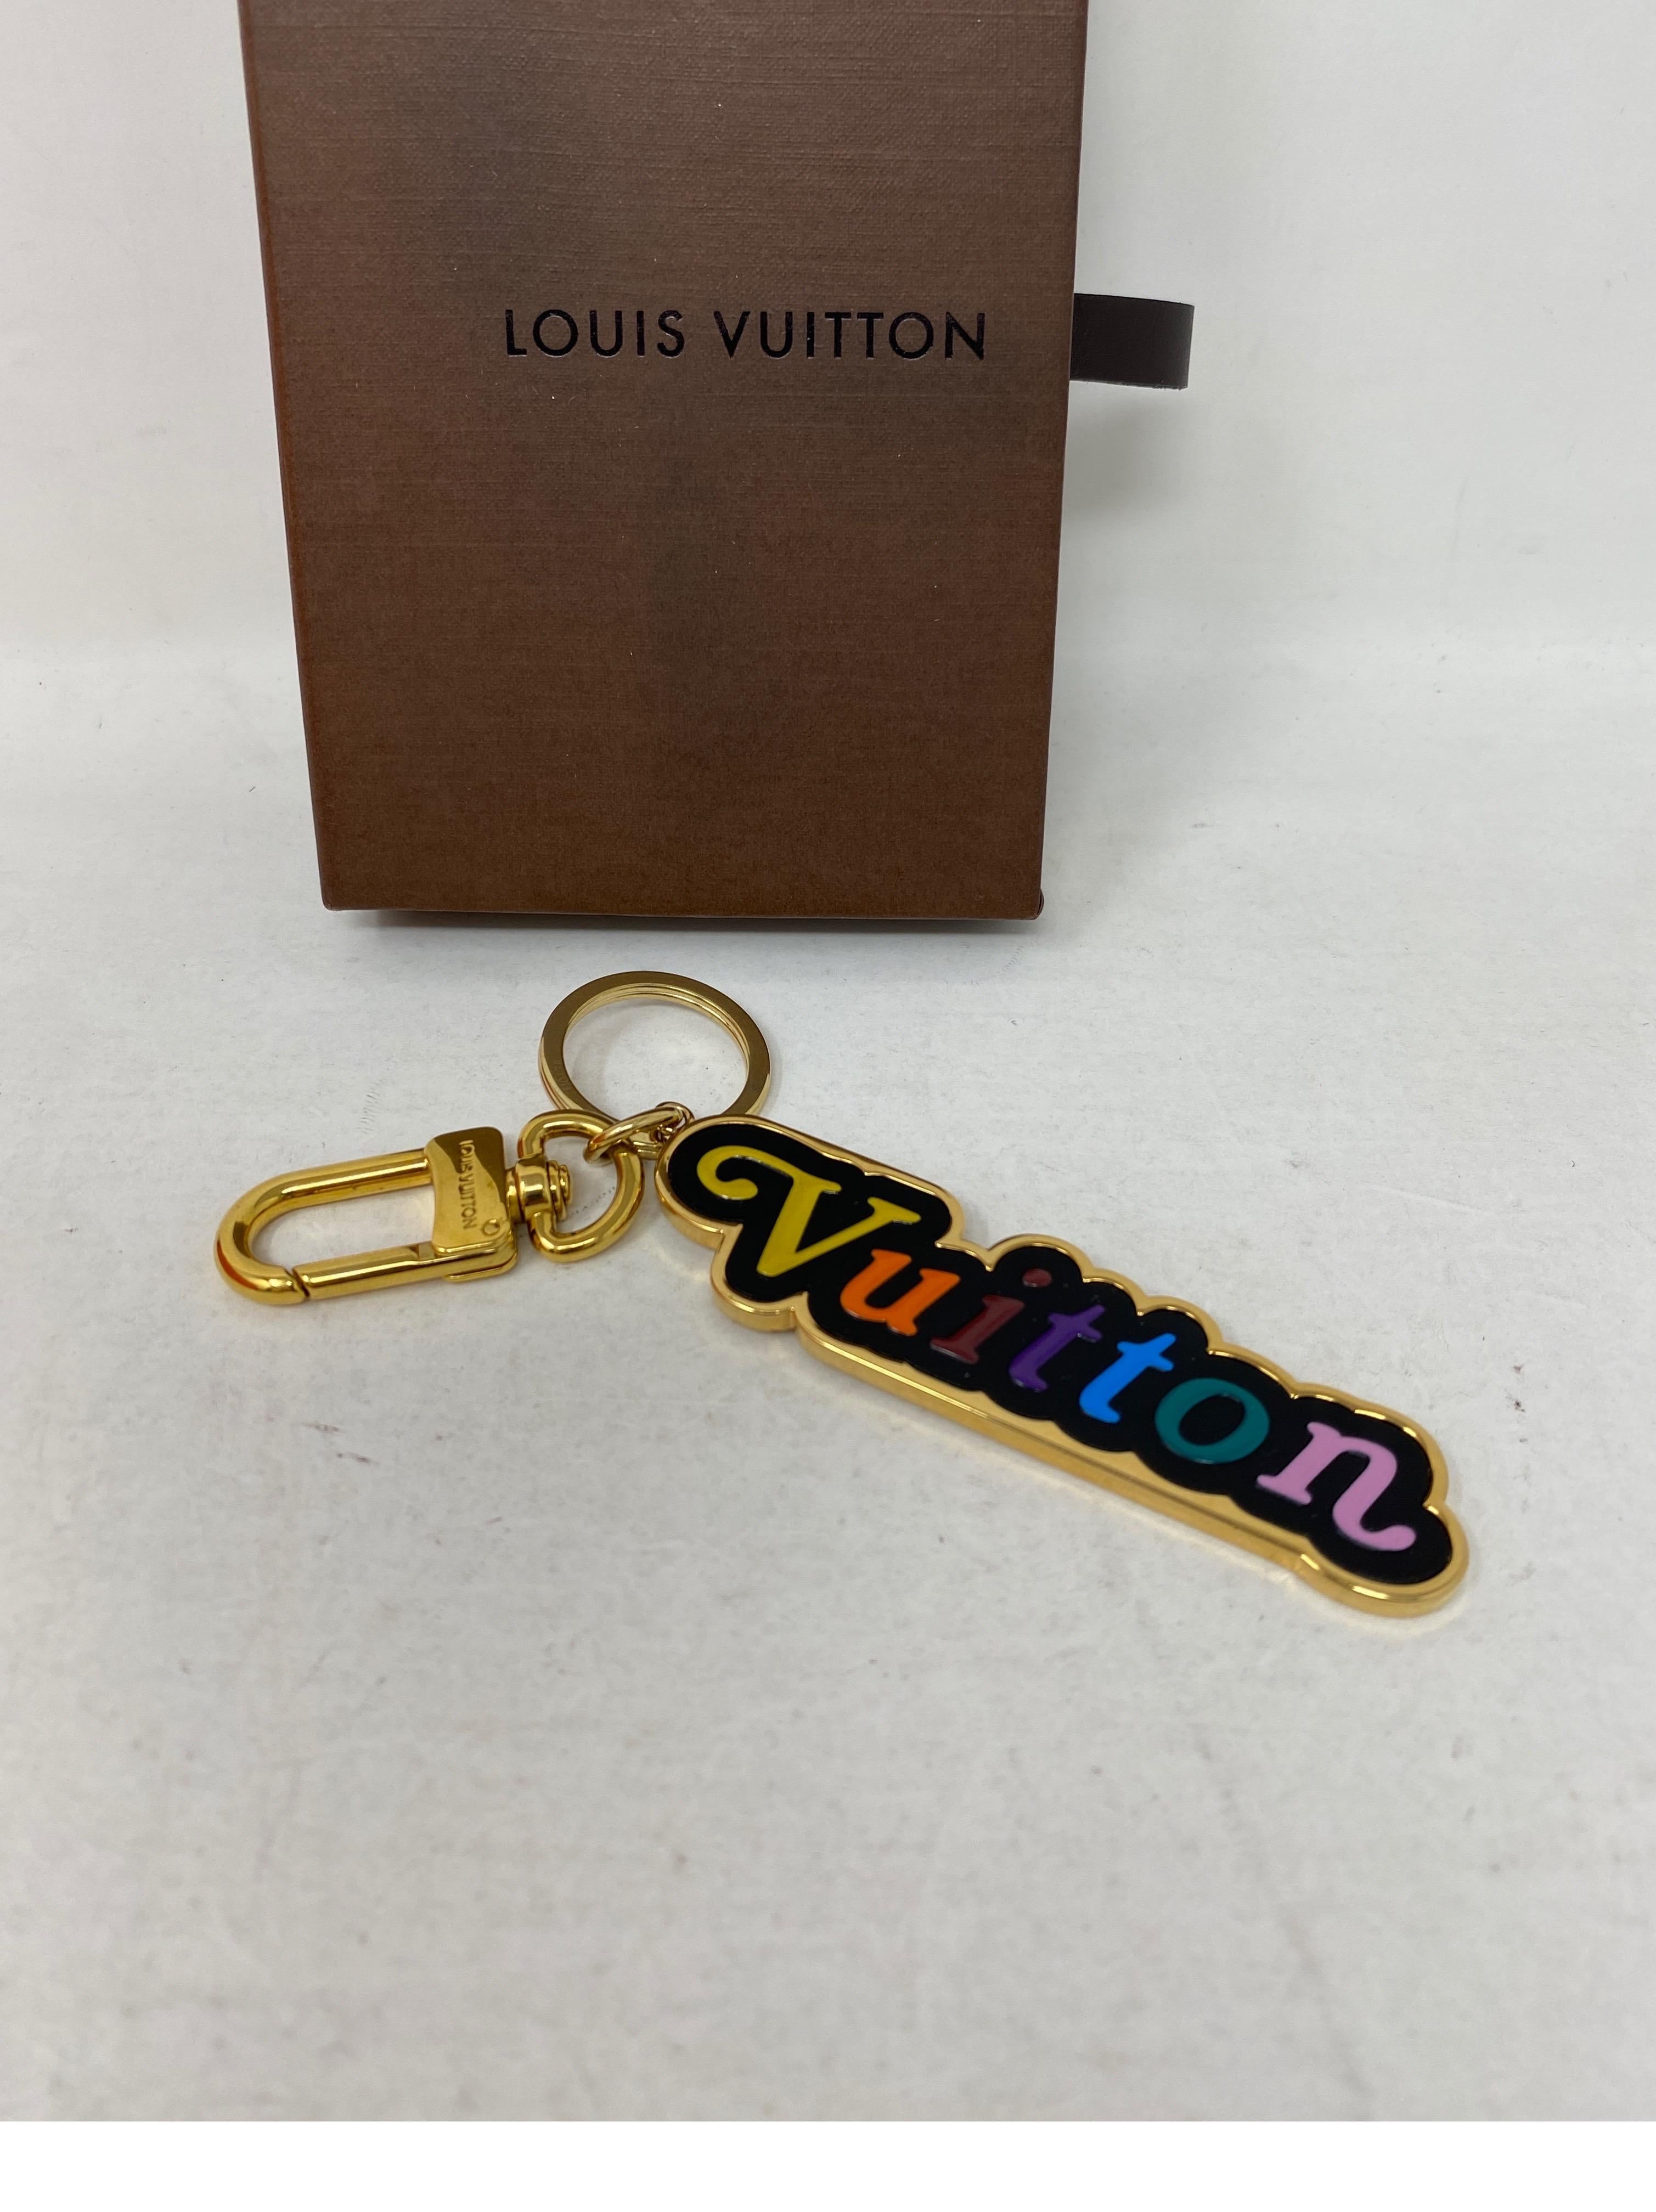 Louis Vuitton Key Holder. Rainbow lettering. Gold hardware. Excellent like new condition. Guaranteed authentic. 